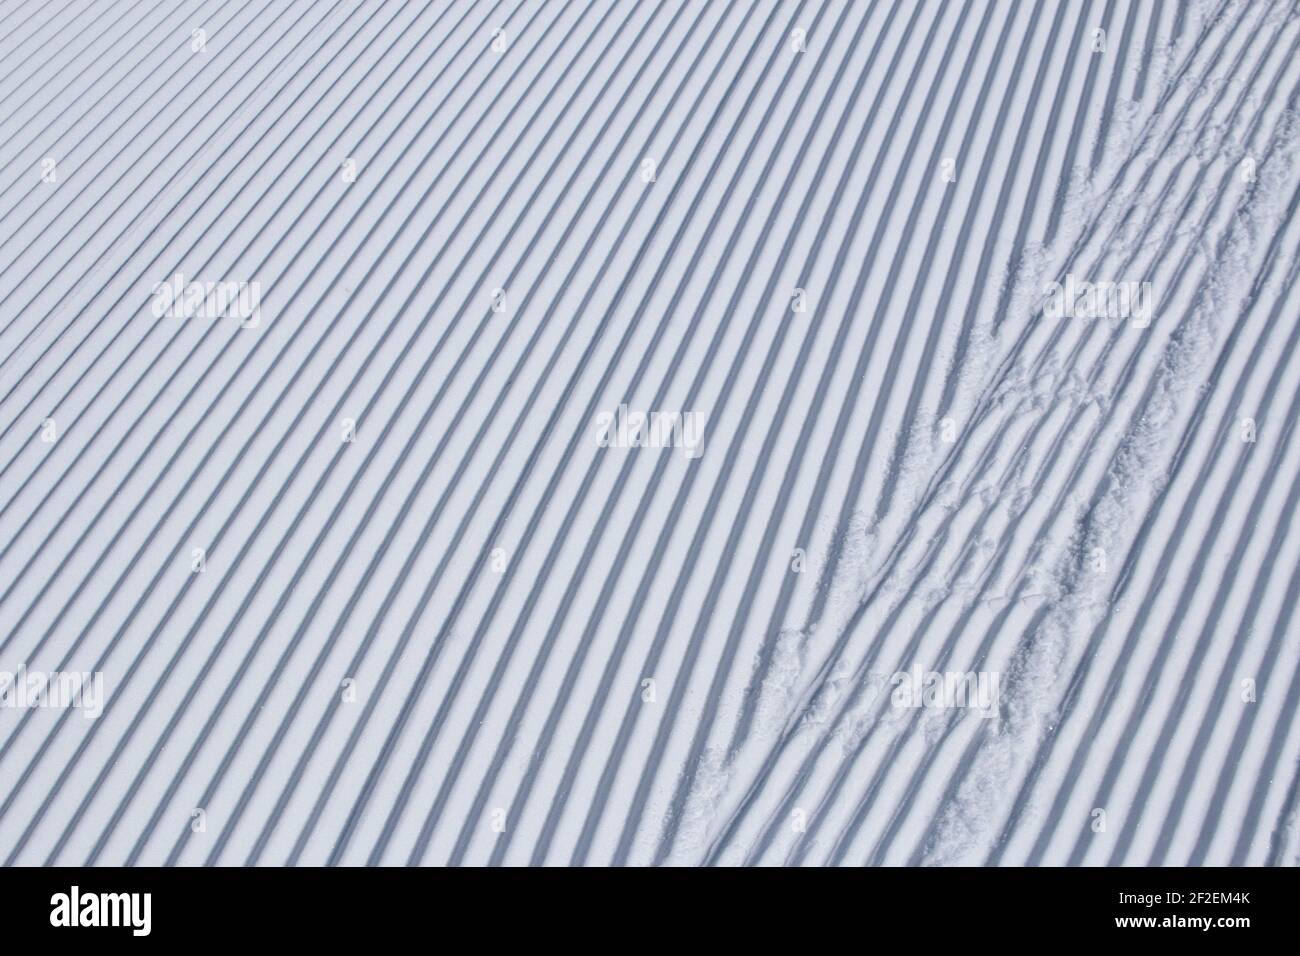 Parallel lines in freshly groomed snow at a ski resort Stock Photo